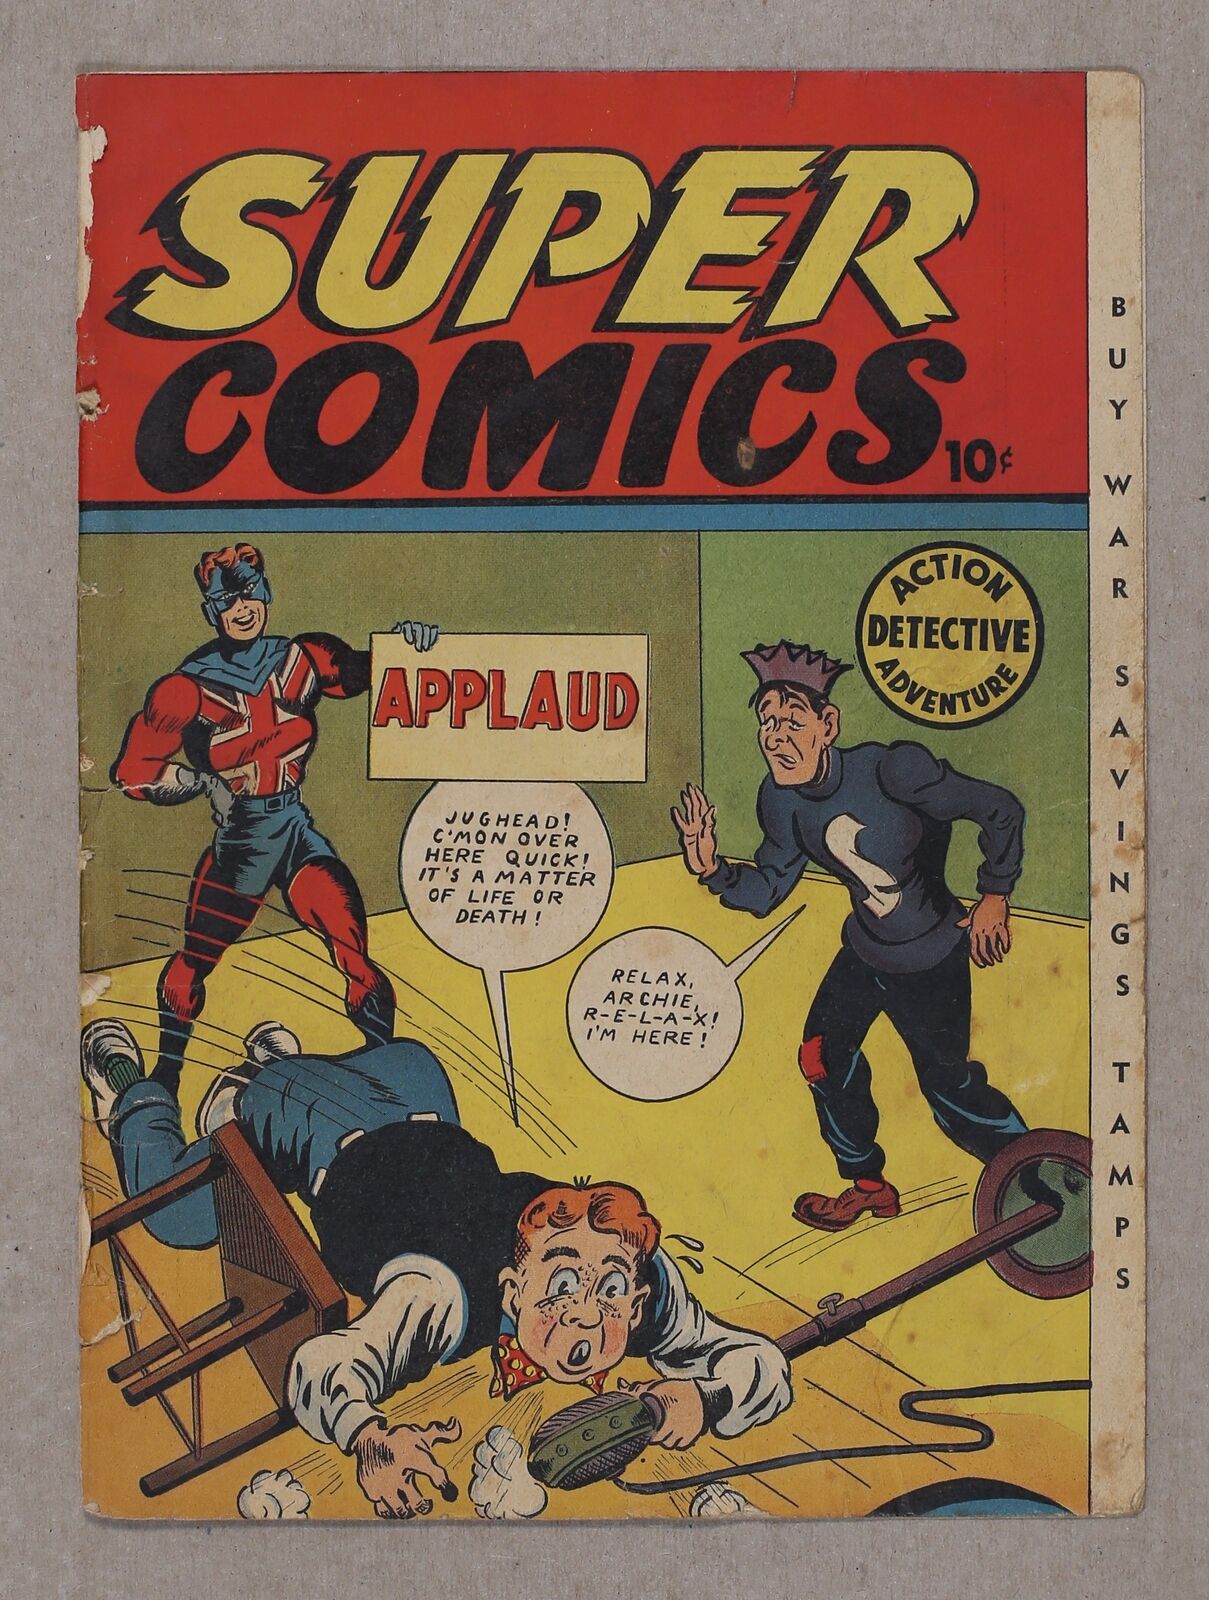 Super Comics #2 Front and Back Cover Only